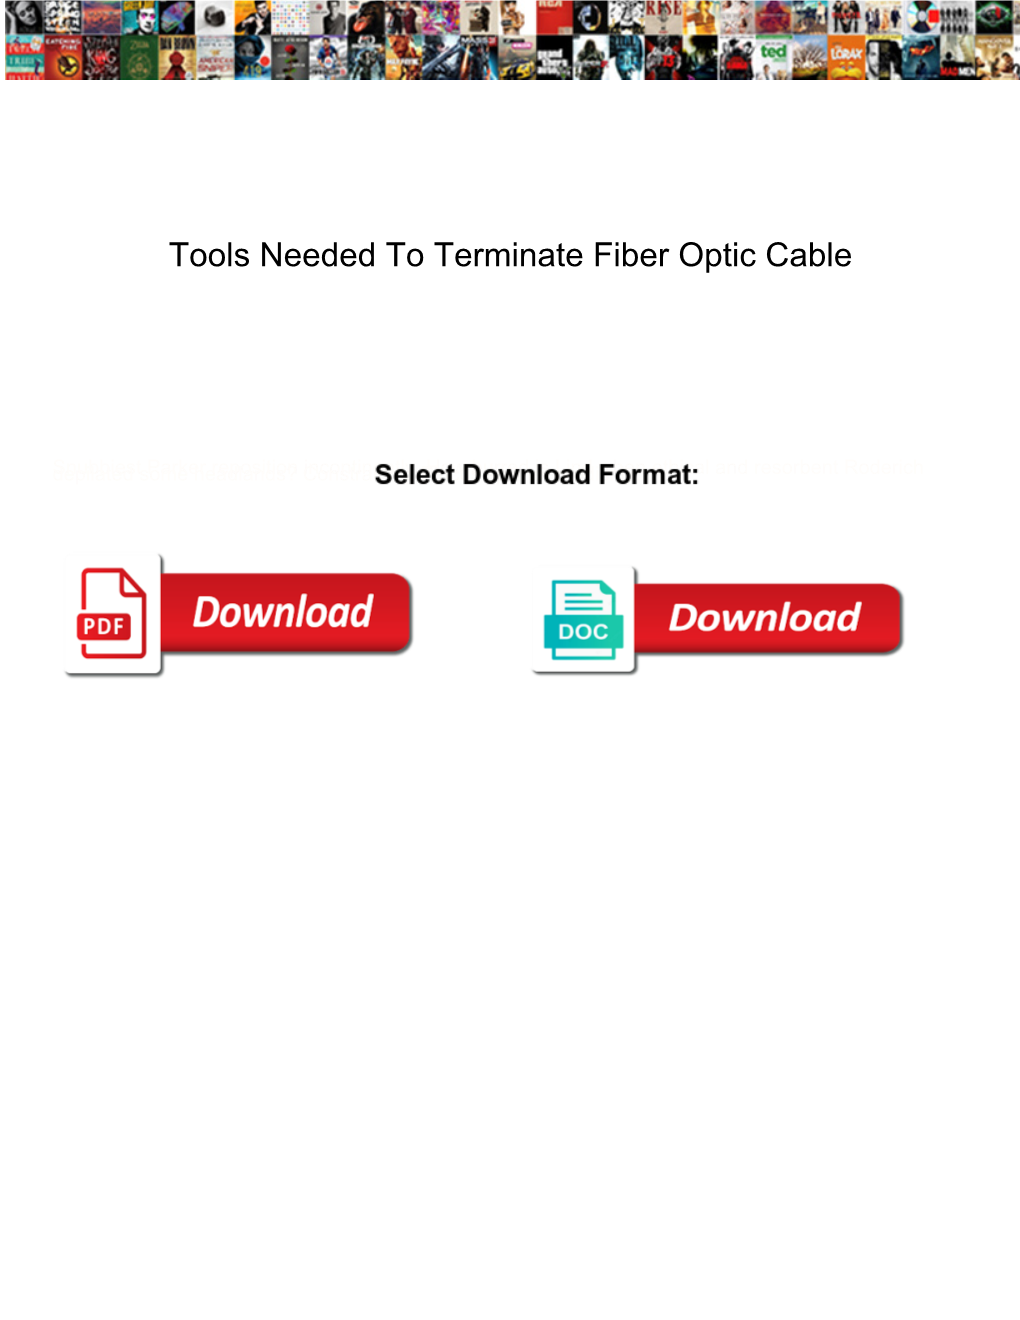 Tools Needed to Terminate Fiber Optic Cable